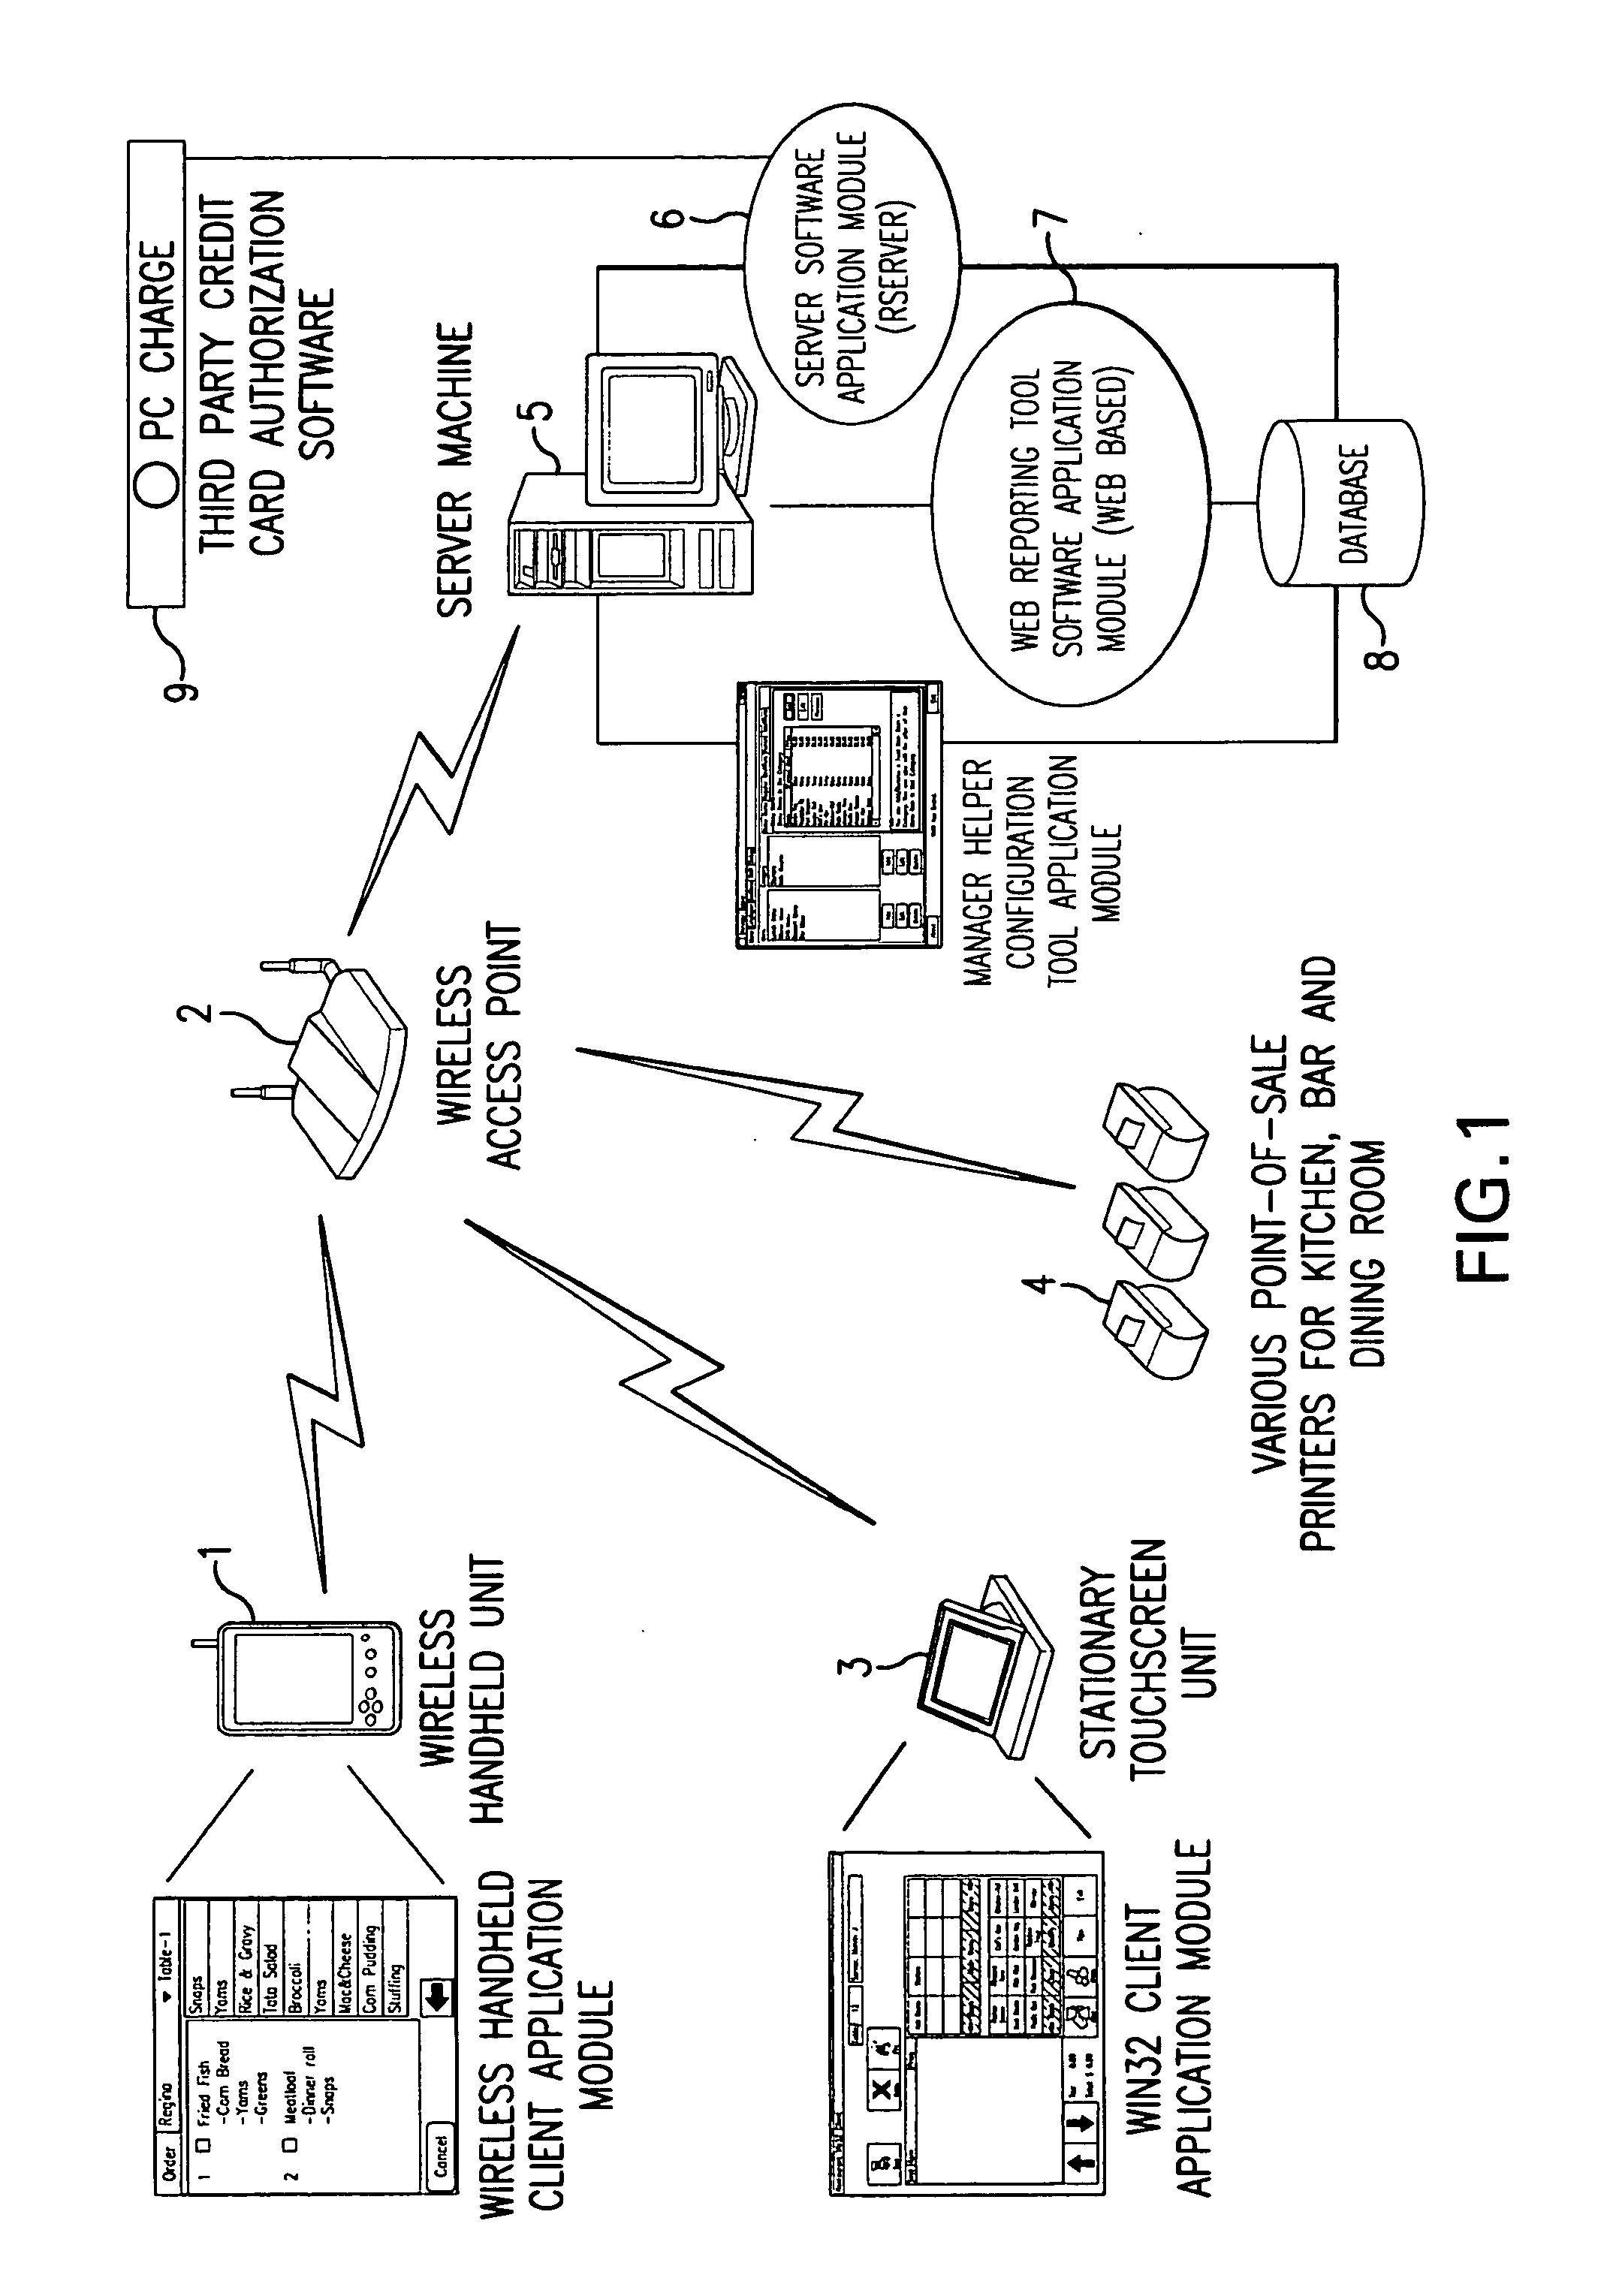 Wireless point-of-sale system and method for management of restaurants